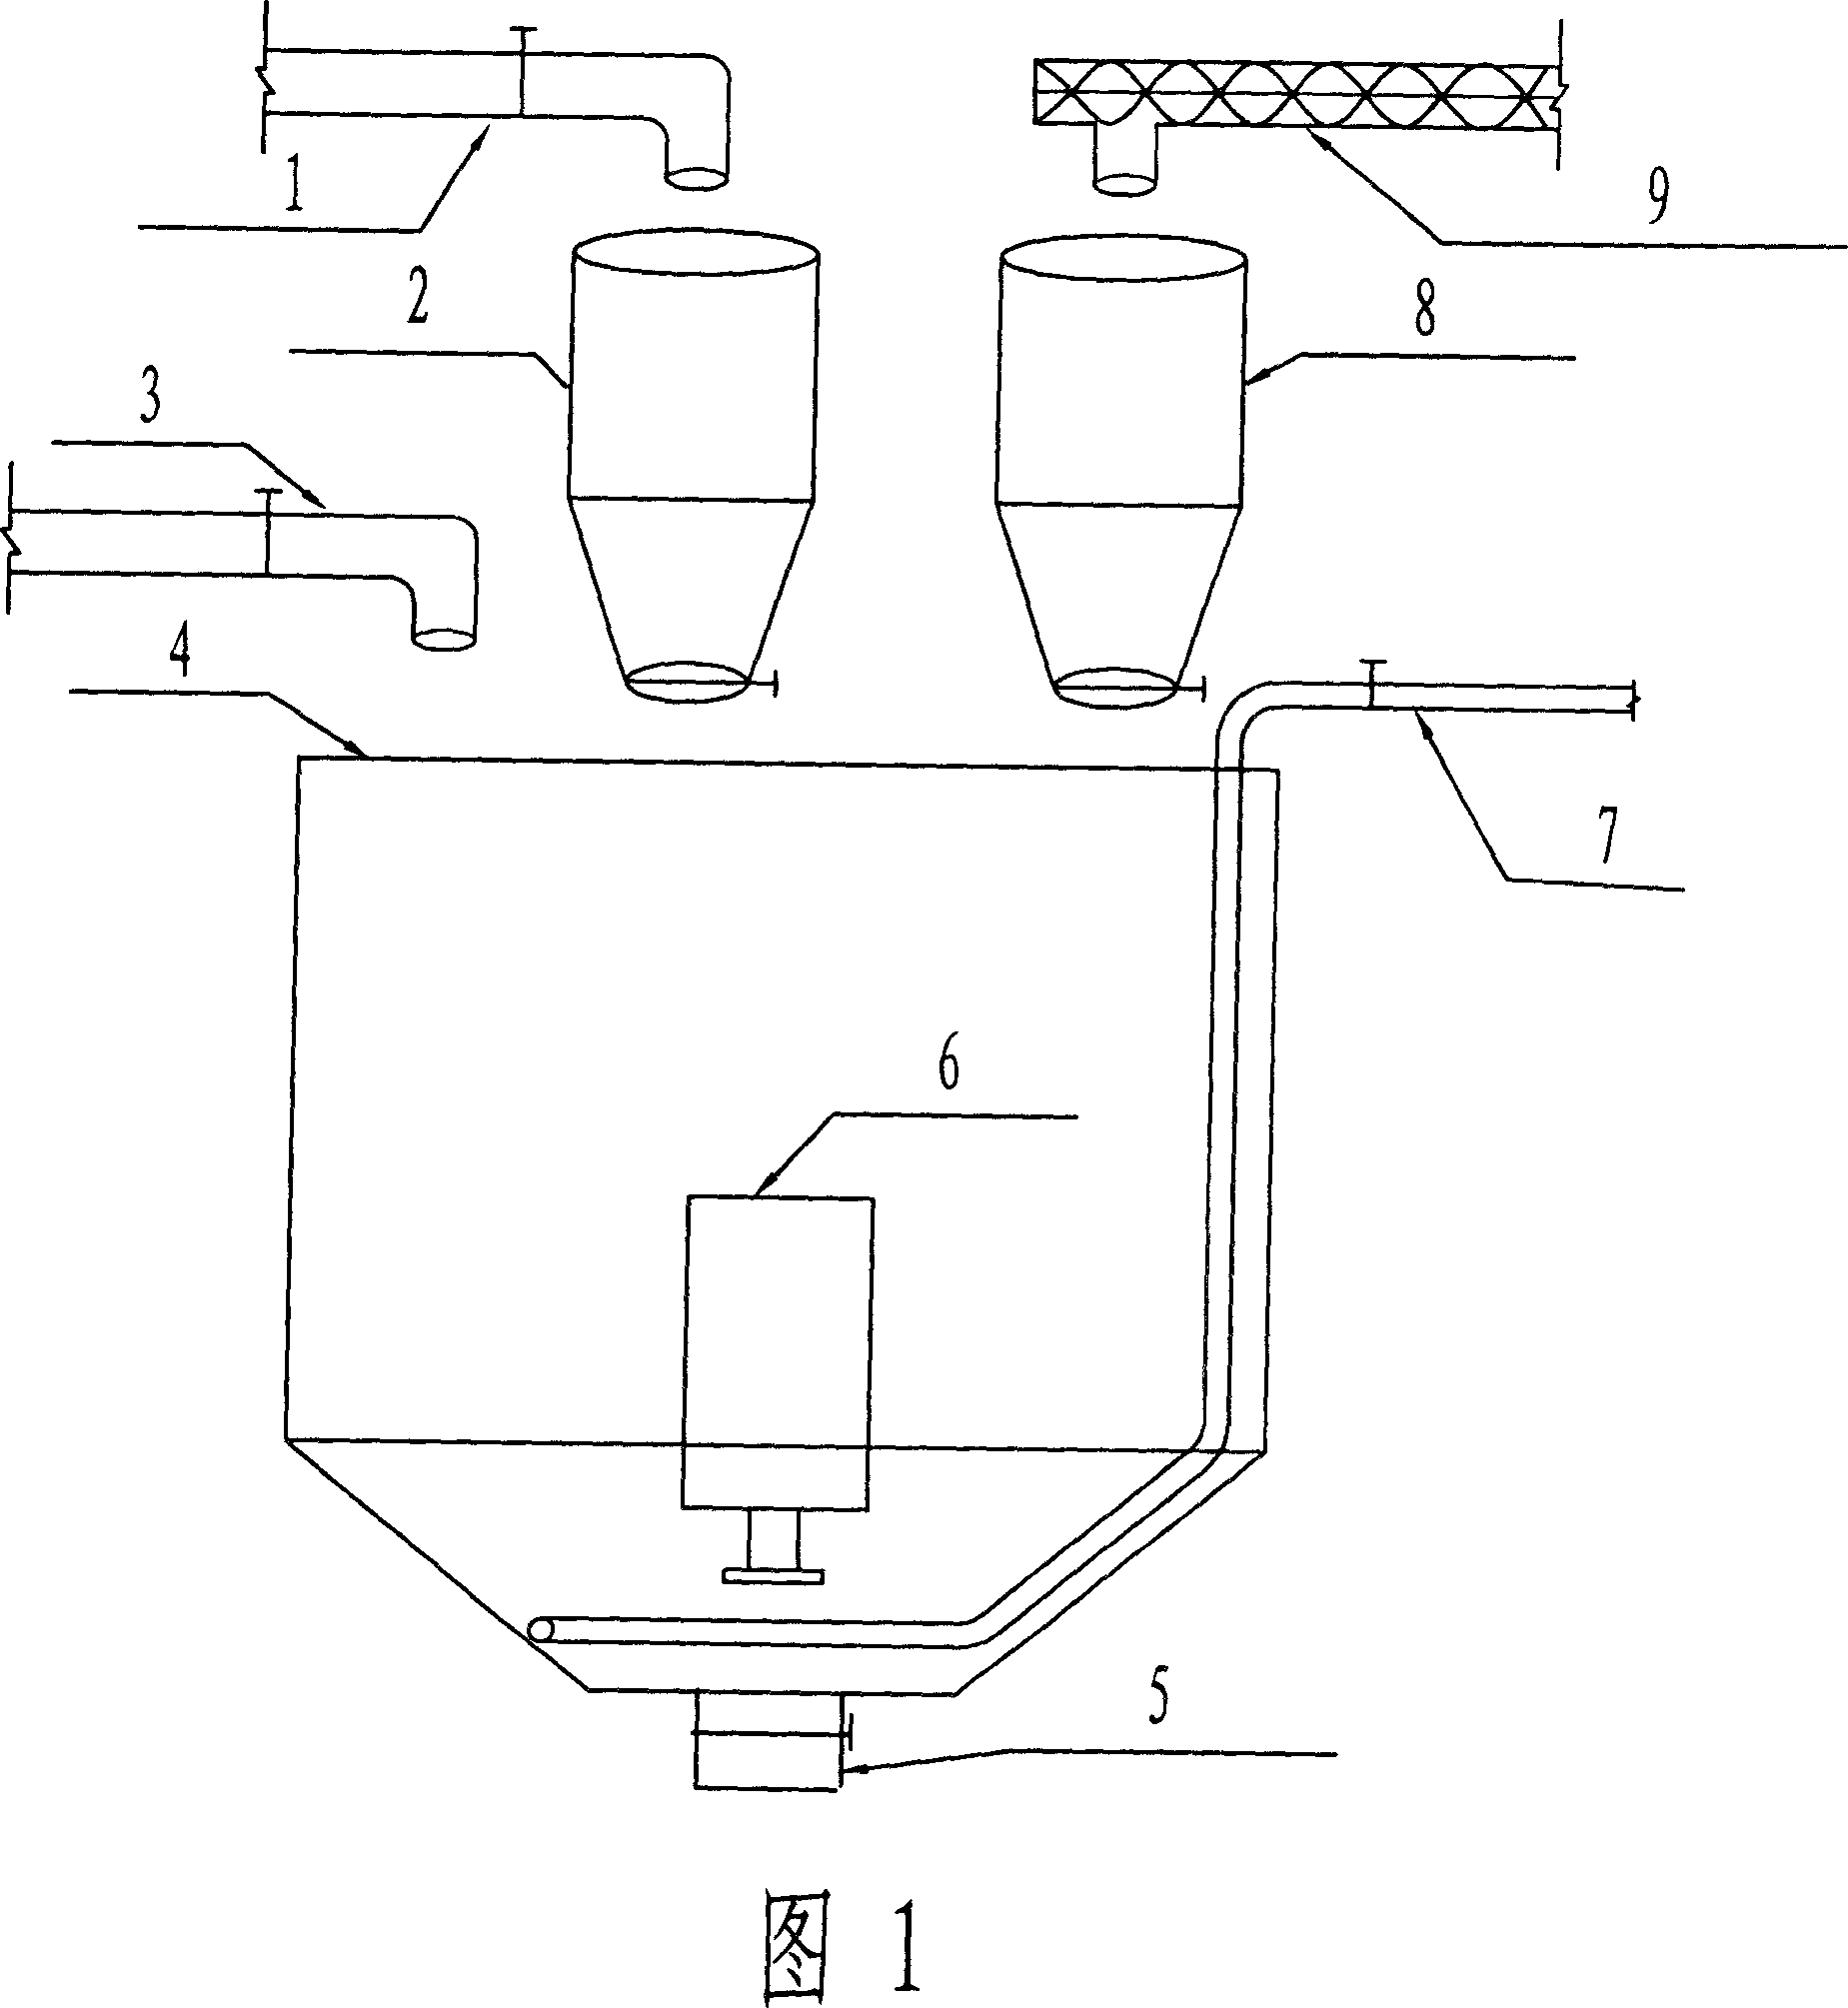 Method of fast and equably mixing concrete with added magnesium oxide